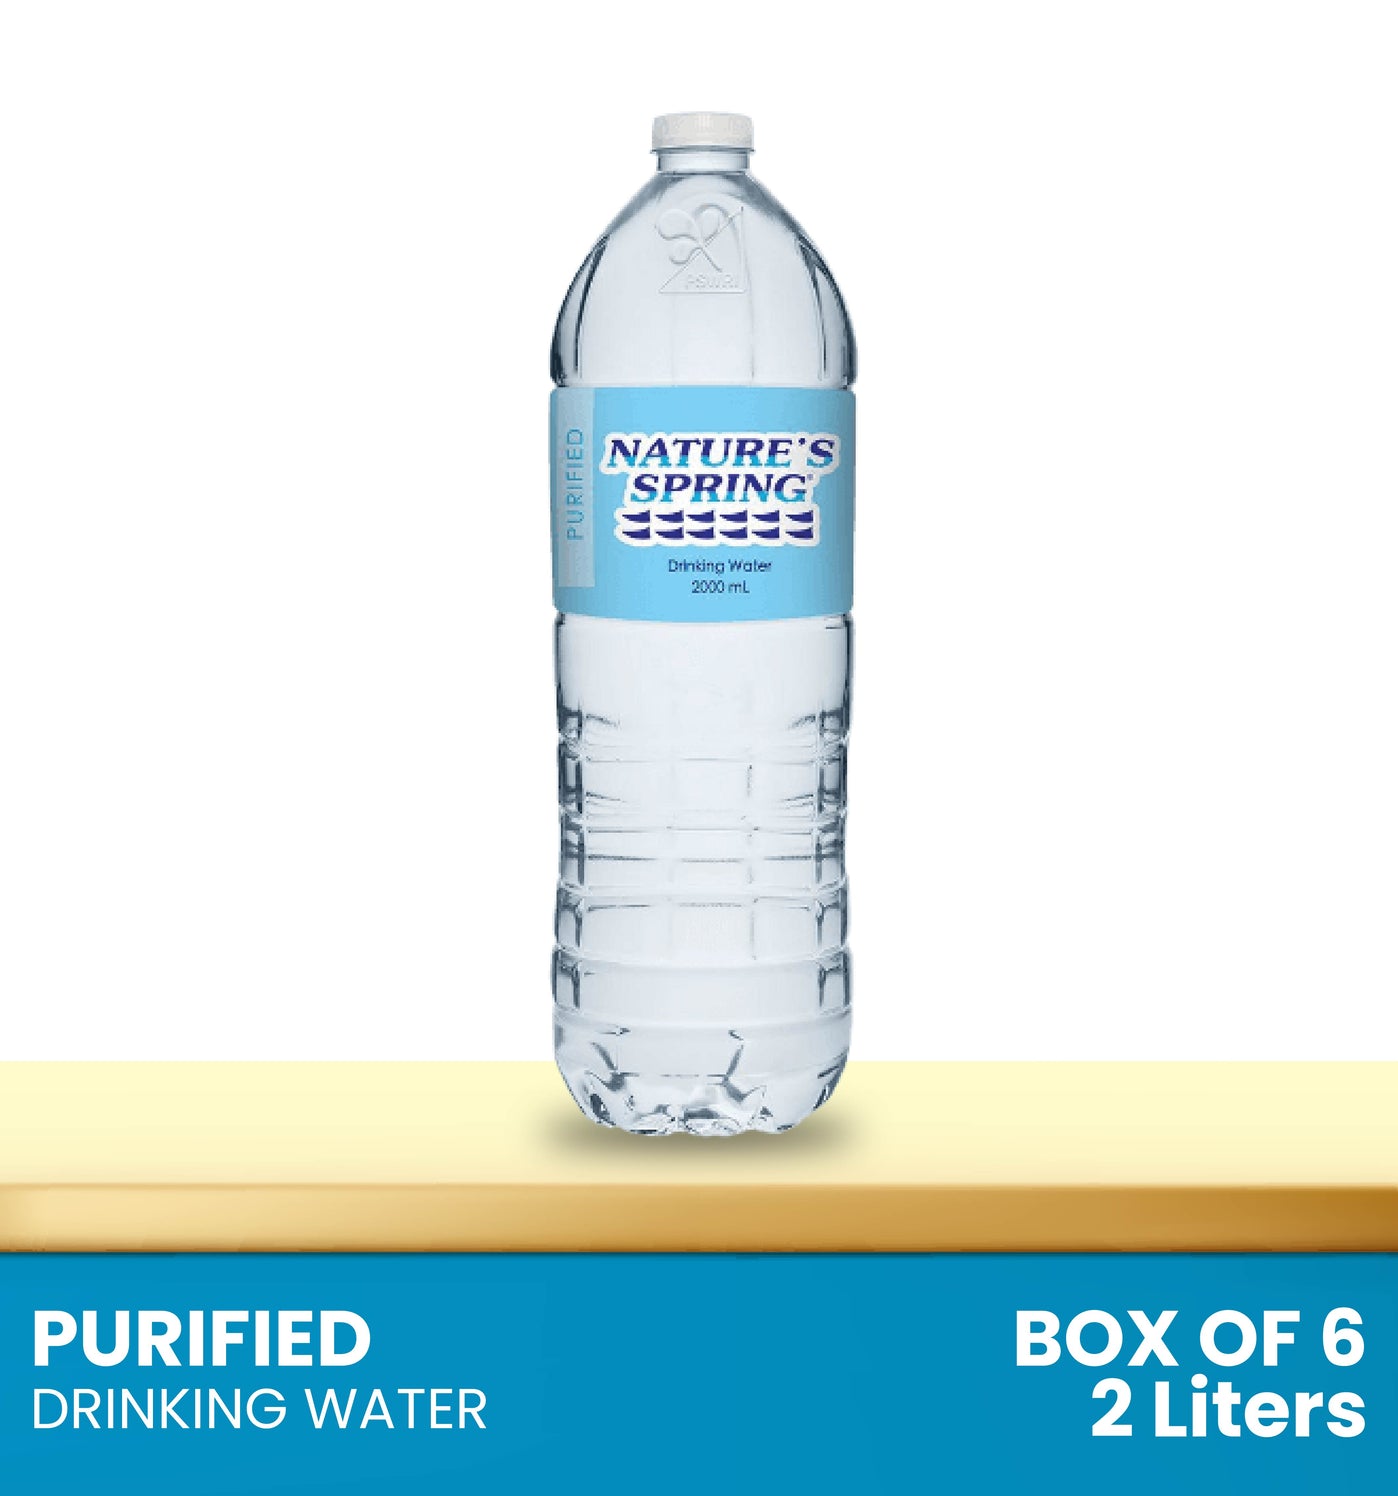 Nature's Spring Purified Drinking Water 2 Liters